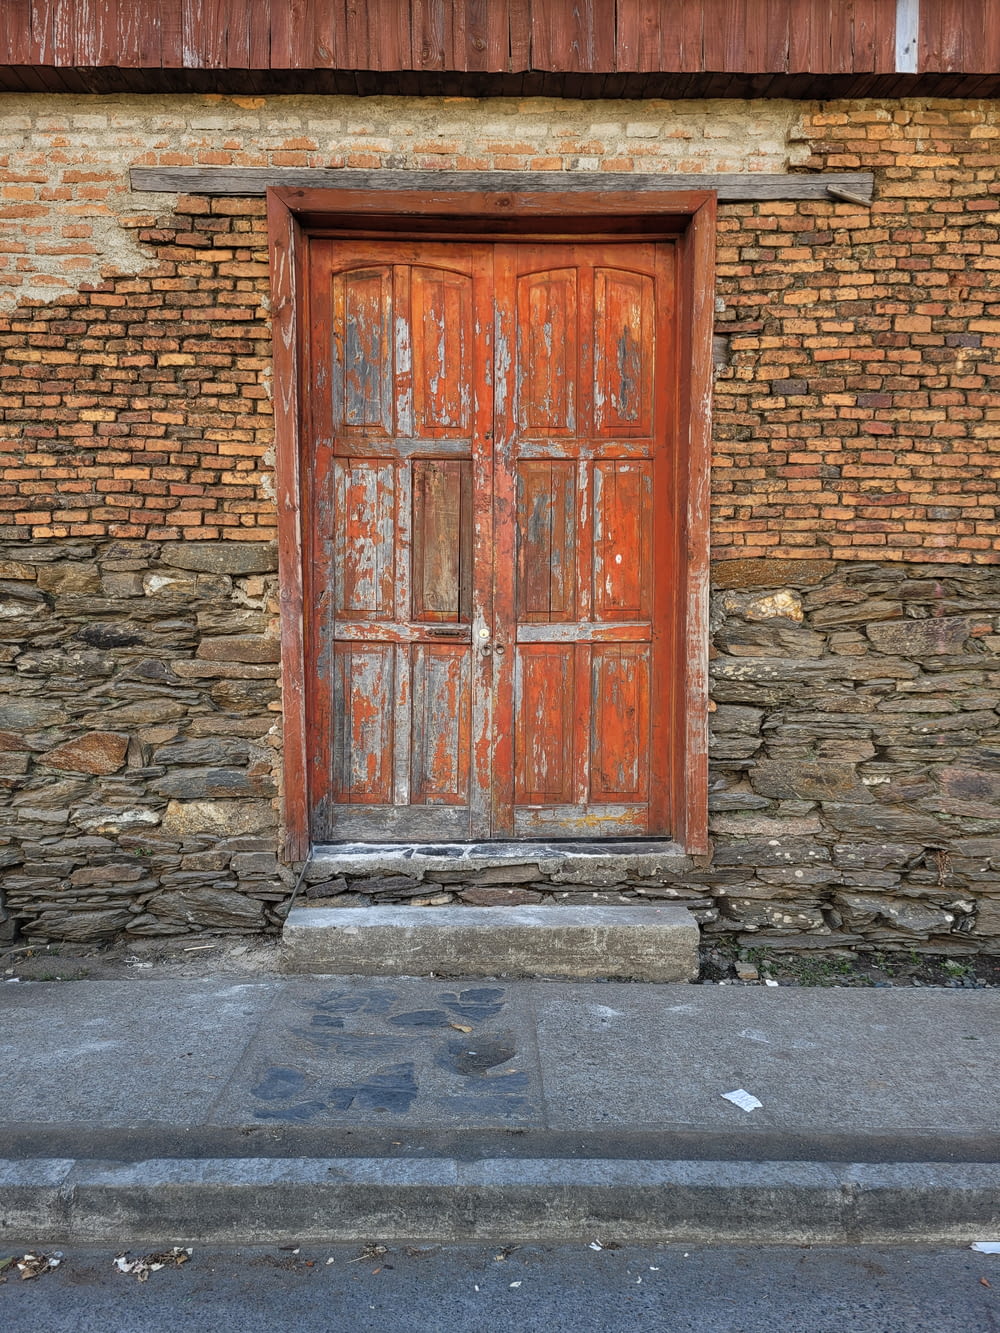 an old wooden door on the side of a brick building